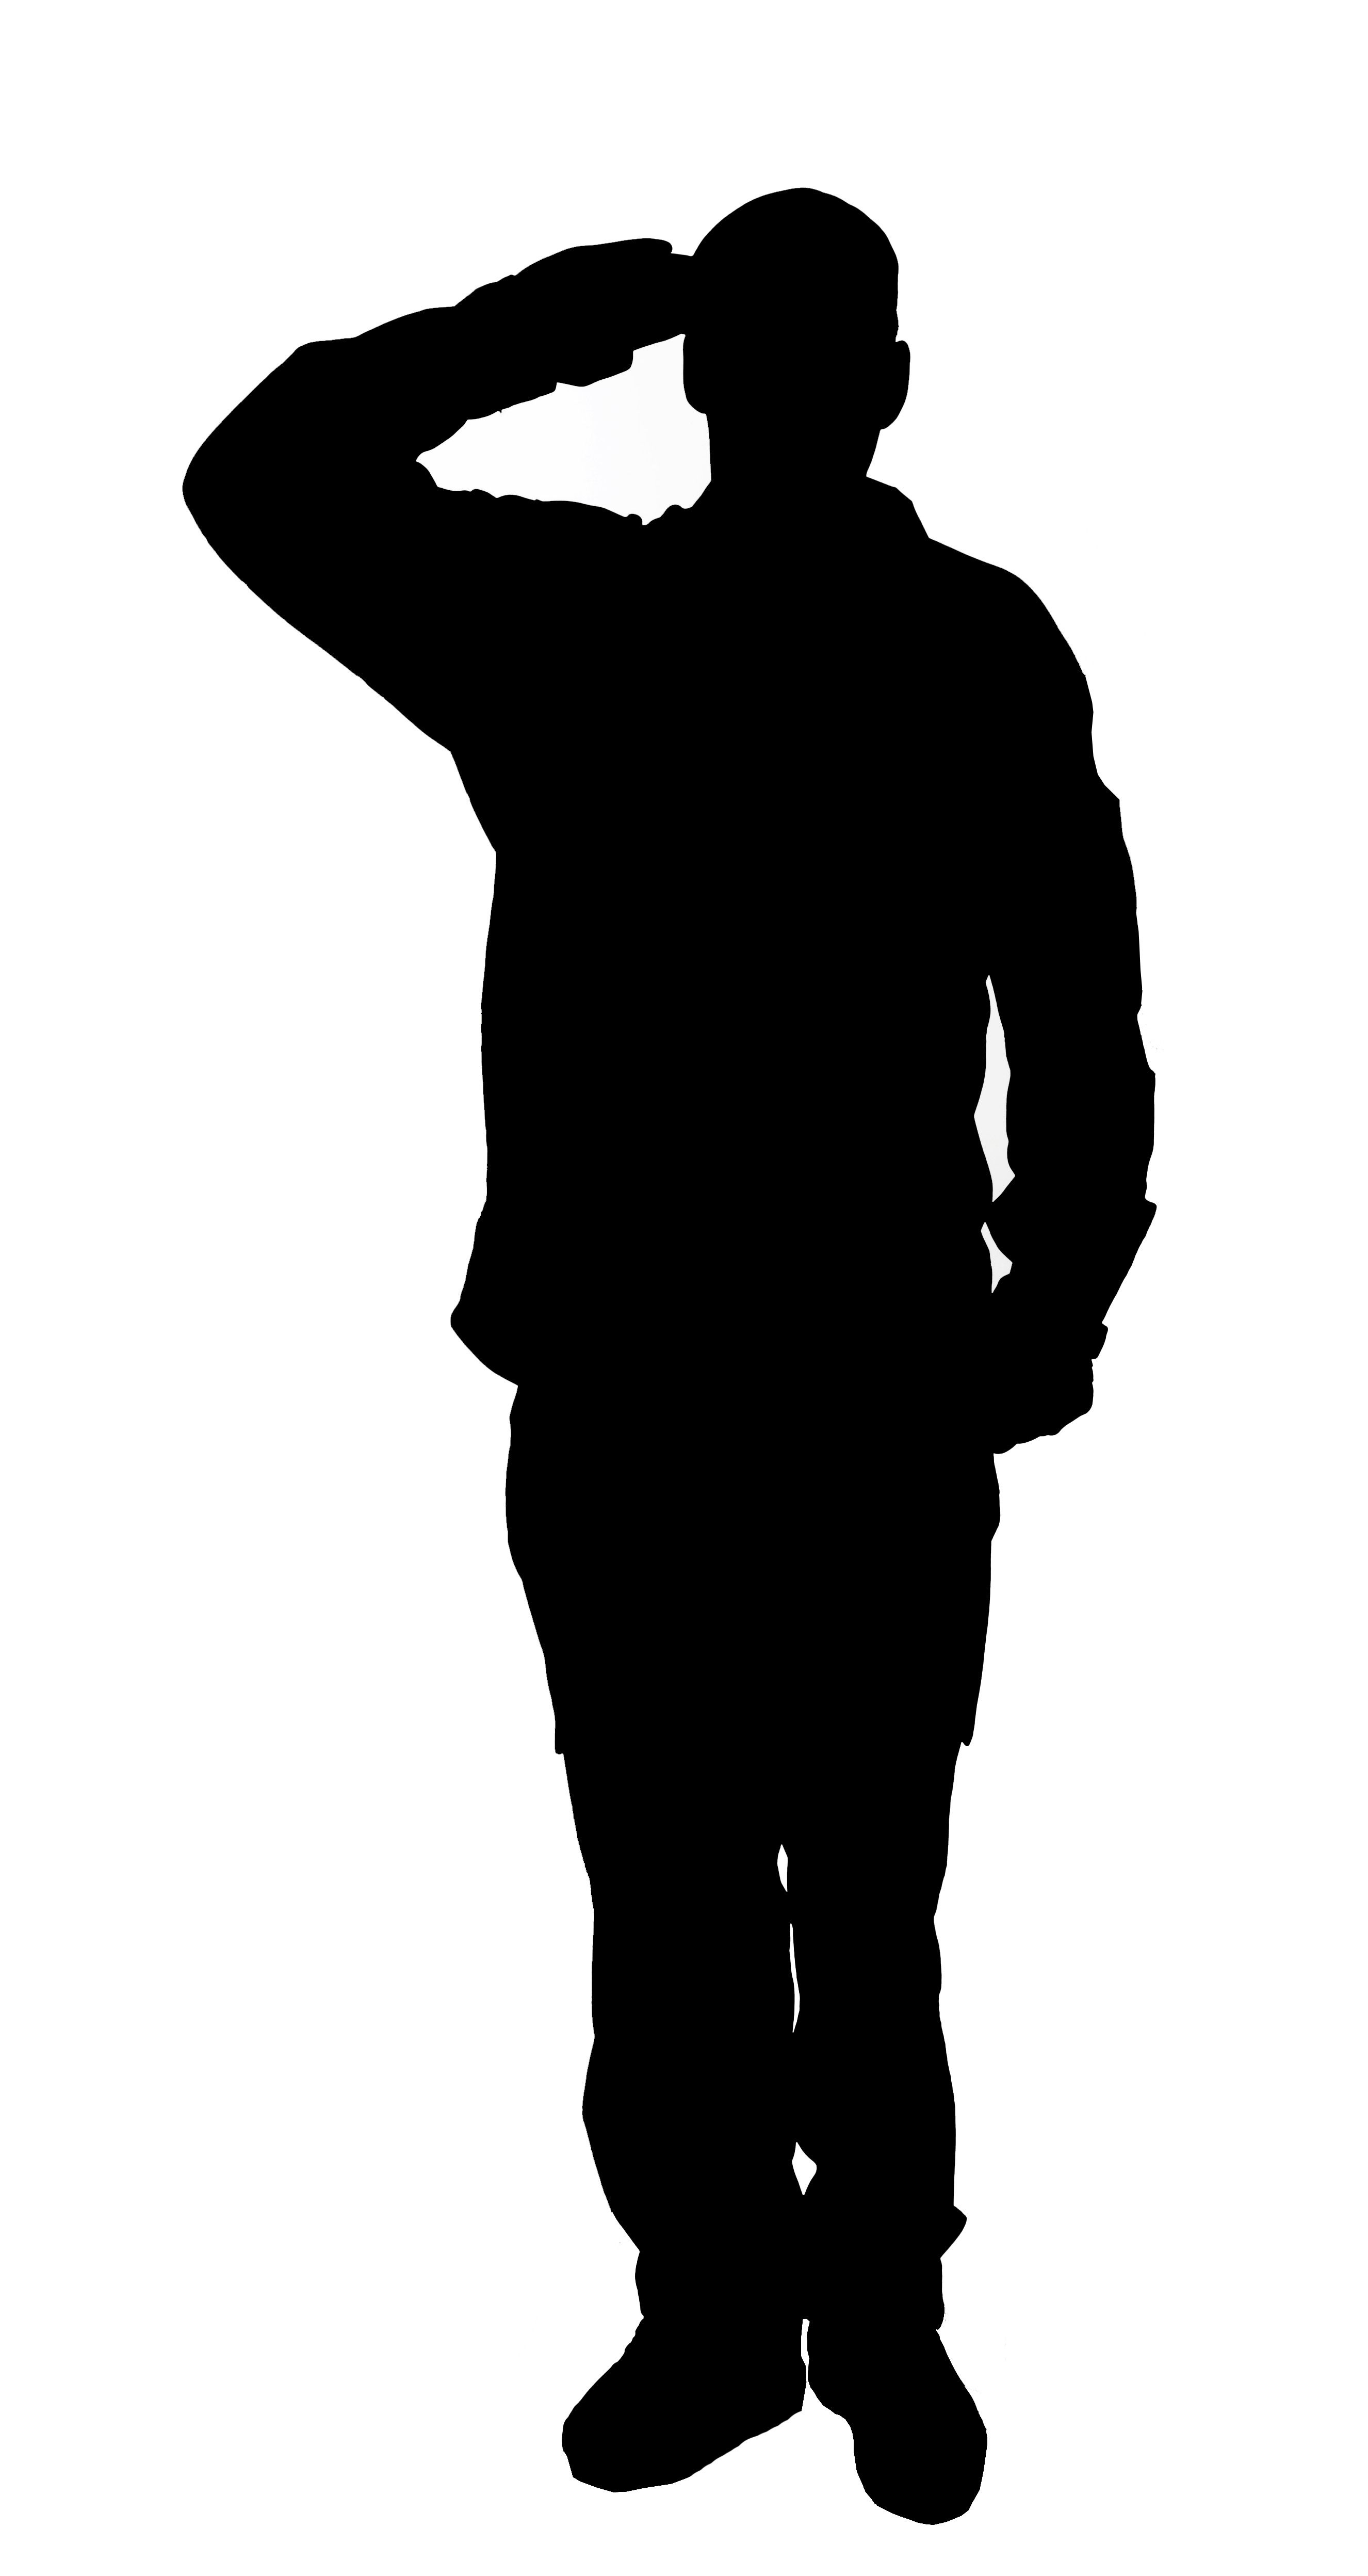 Army clipart silhouette. Soldier draw on wall